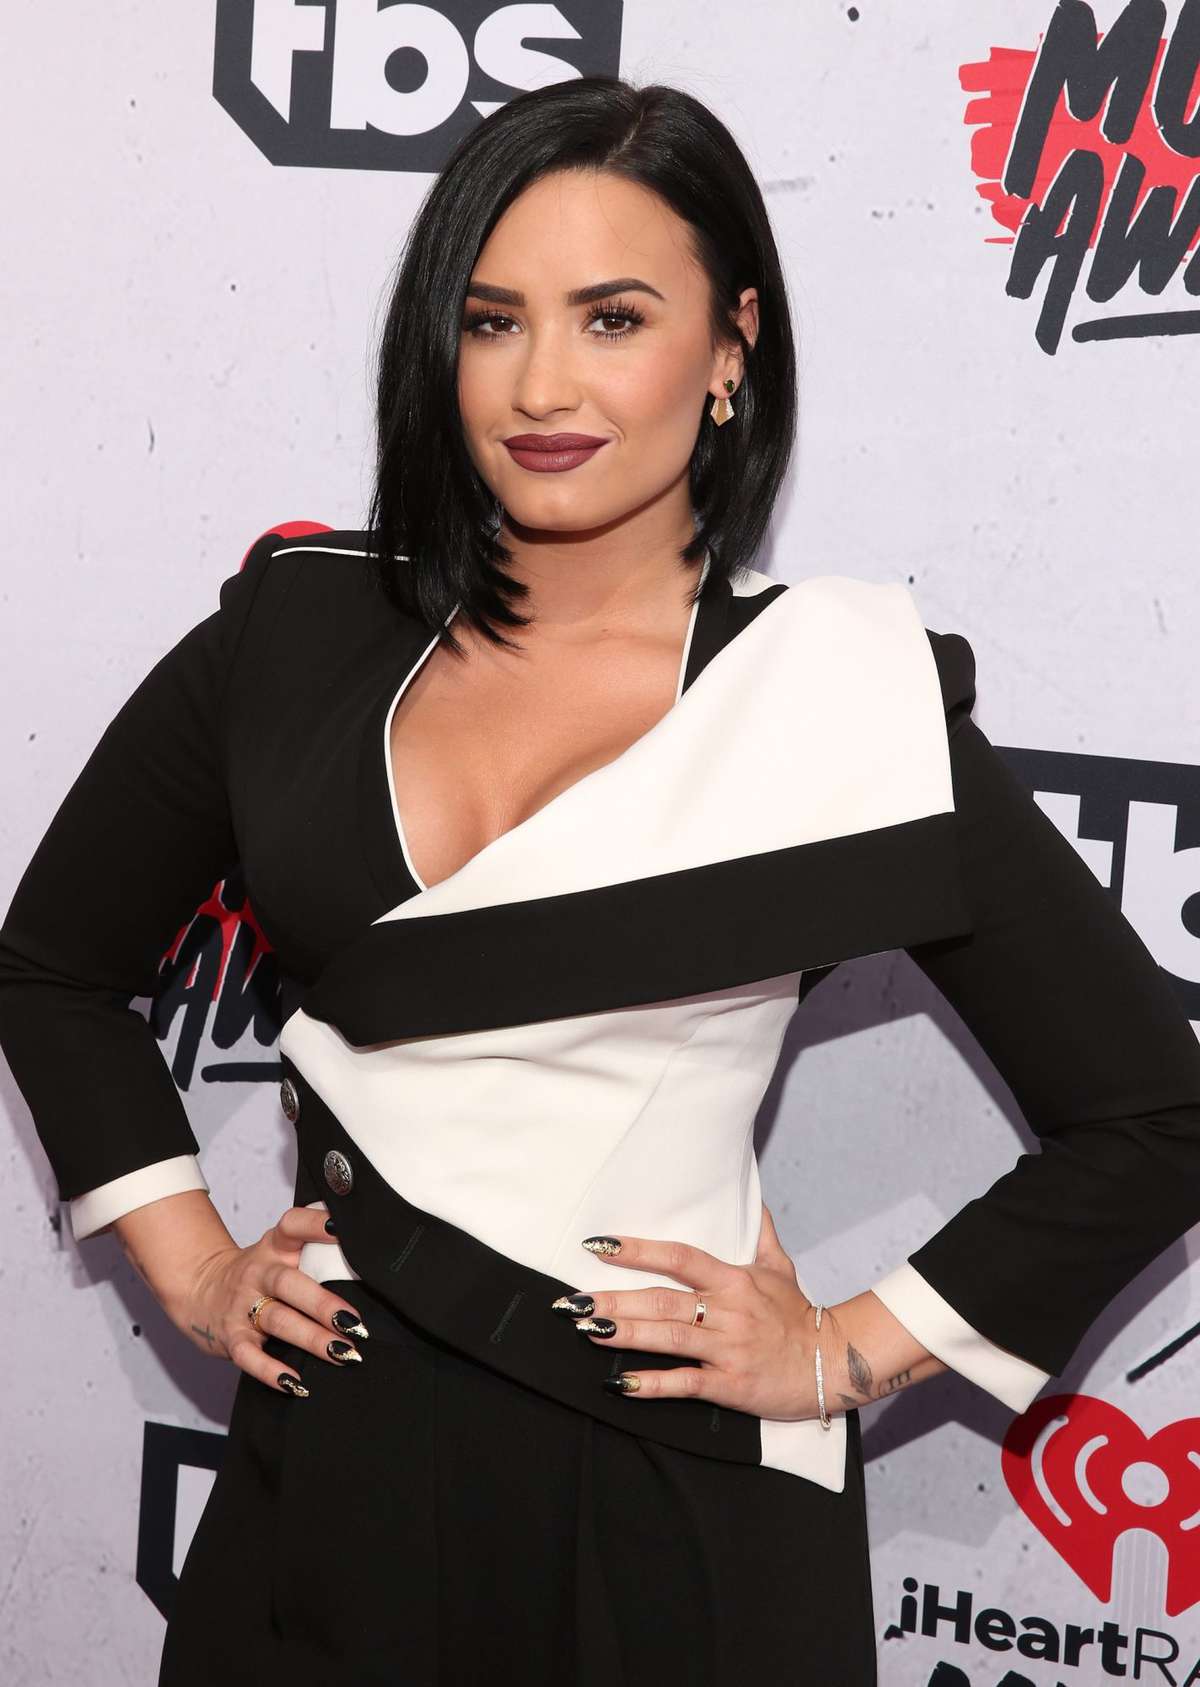 Demi Lovato attends the iHeartRadio Music Awards at the Forum on April 3, 2016 in Inglewood, California.